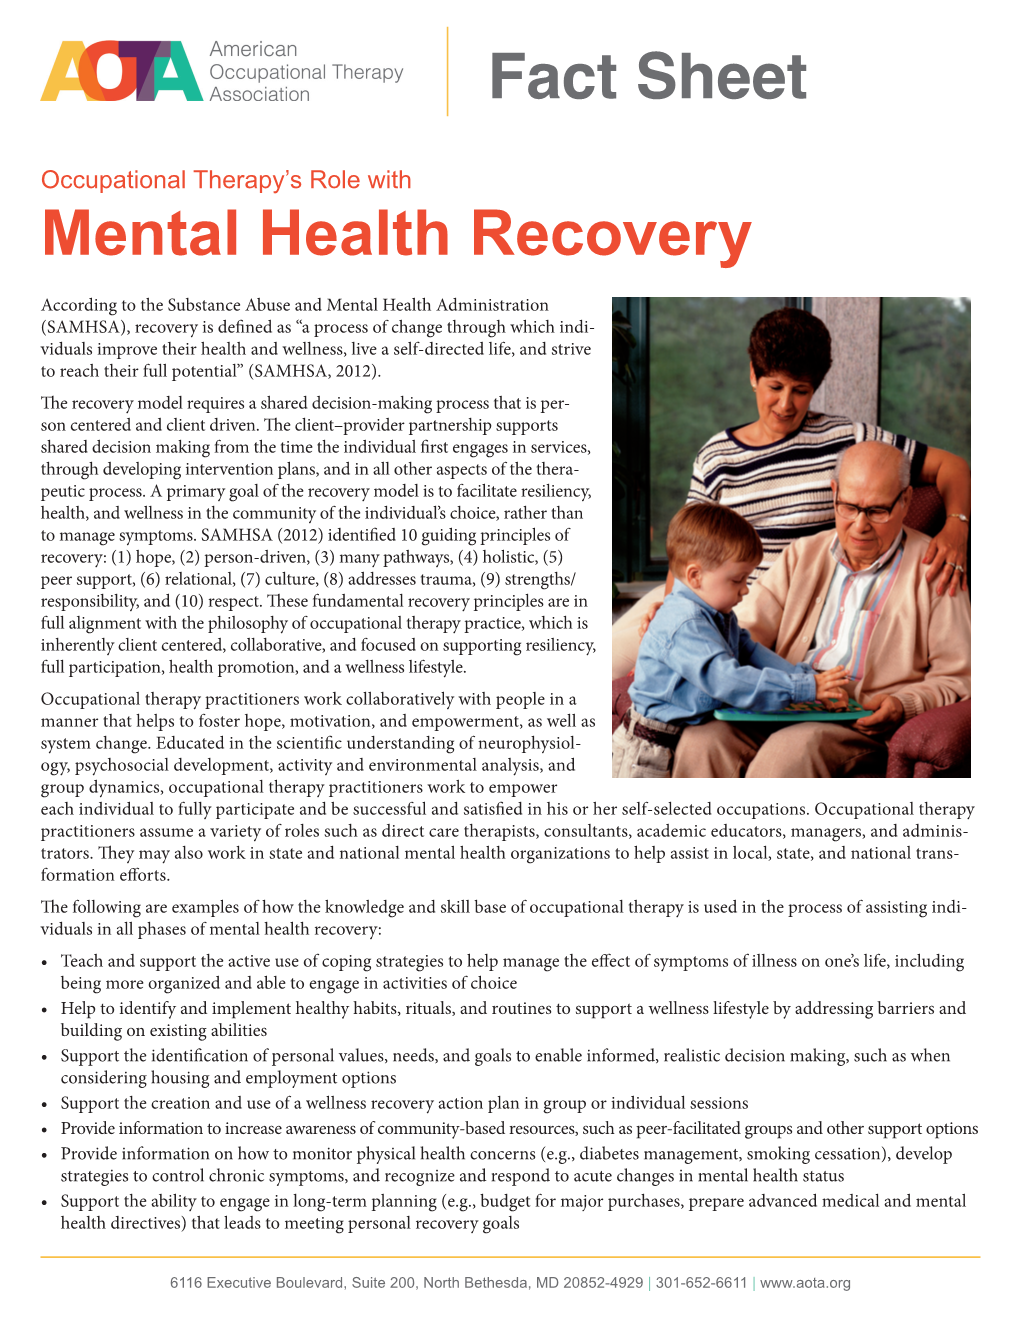 Mental Health Recovery Fact Sheet